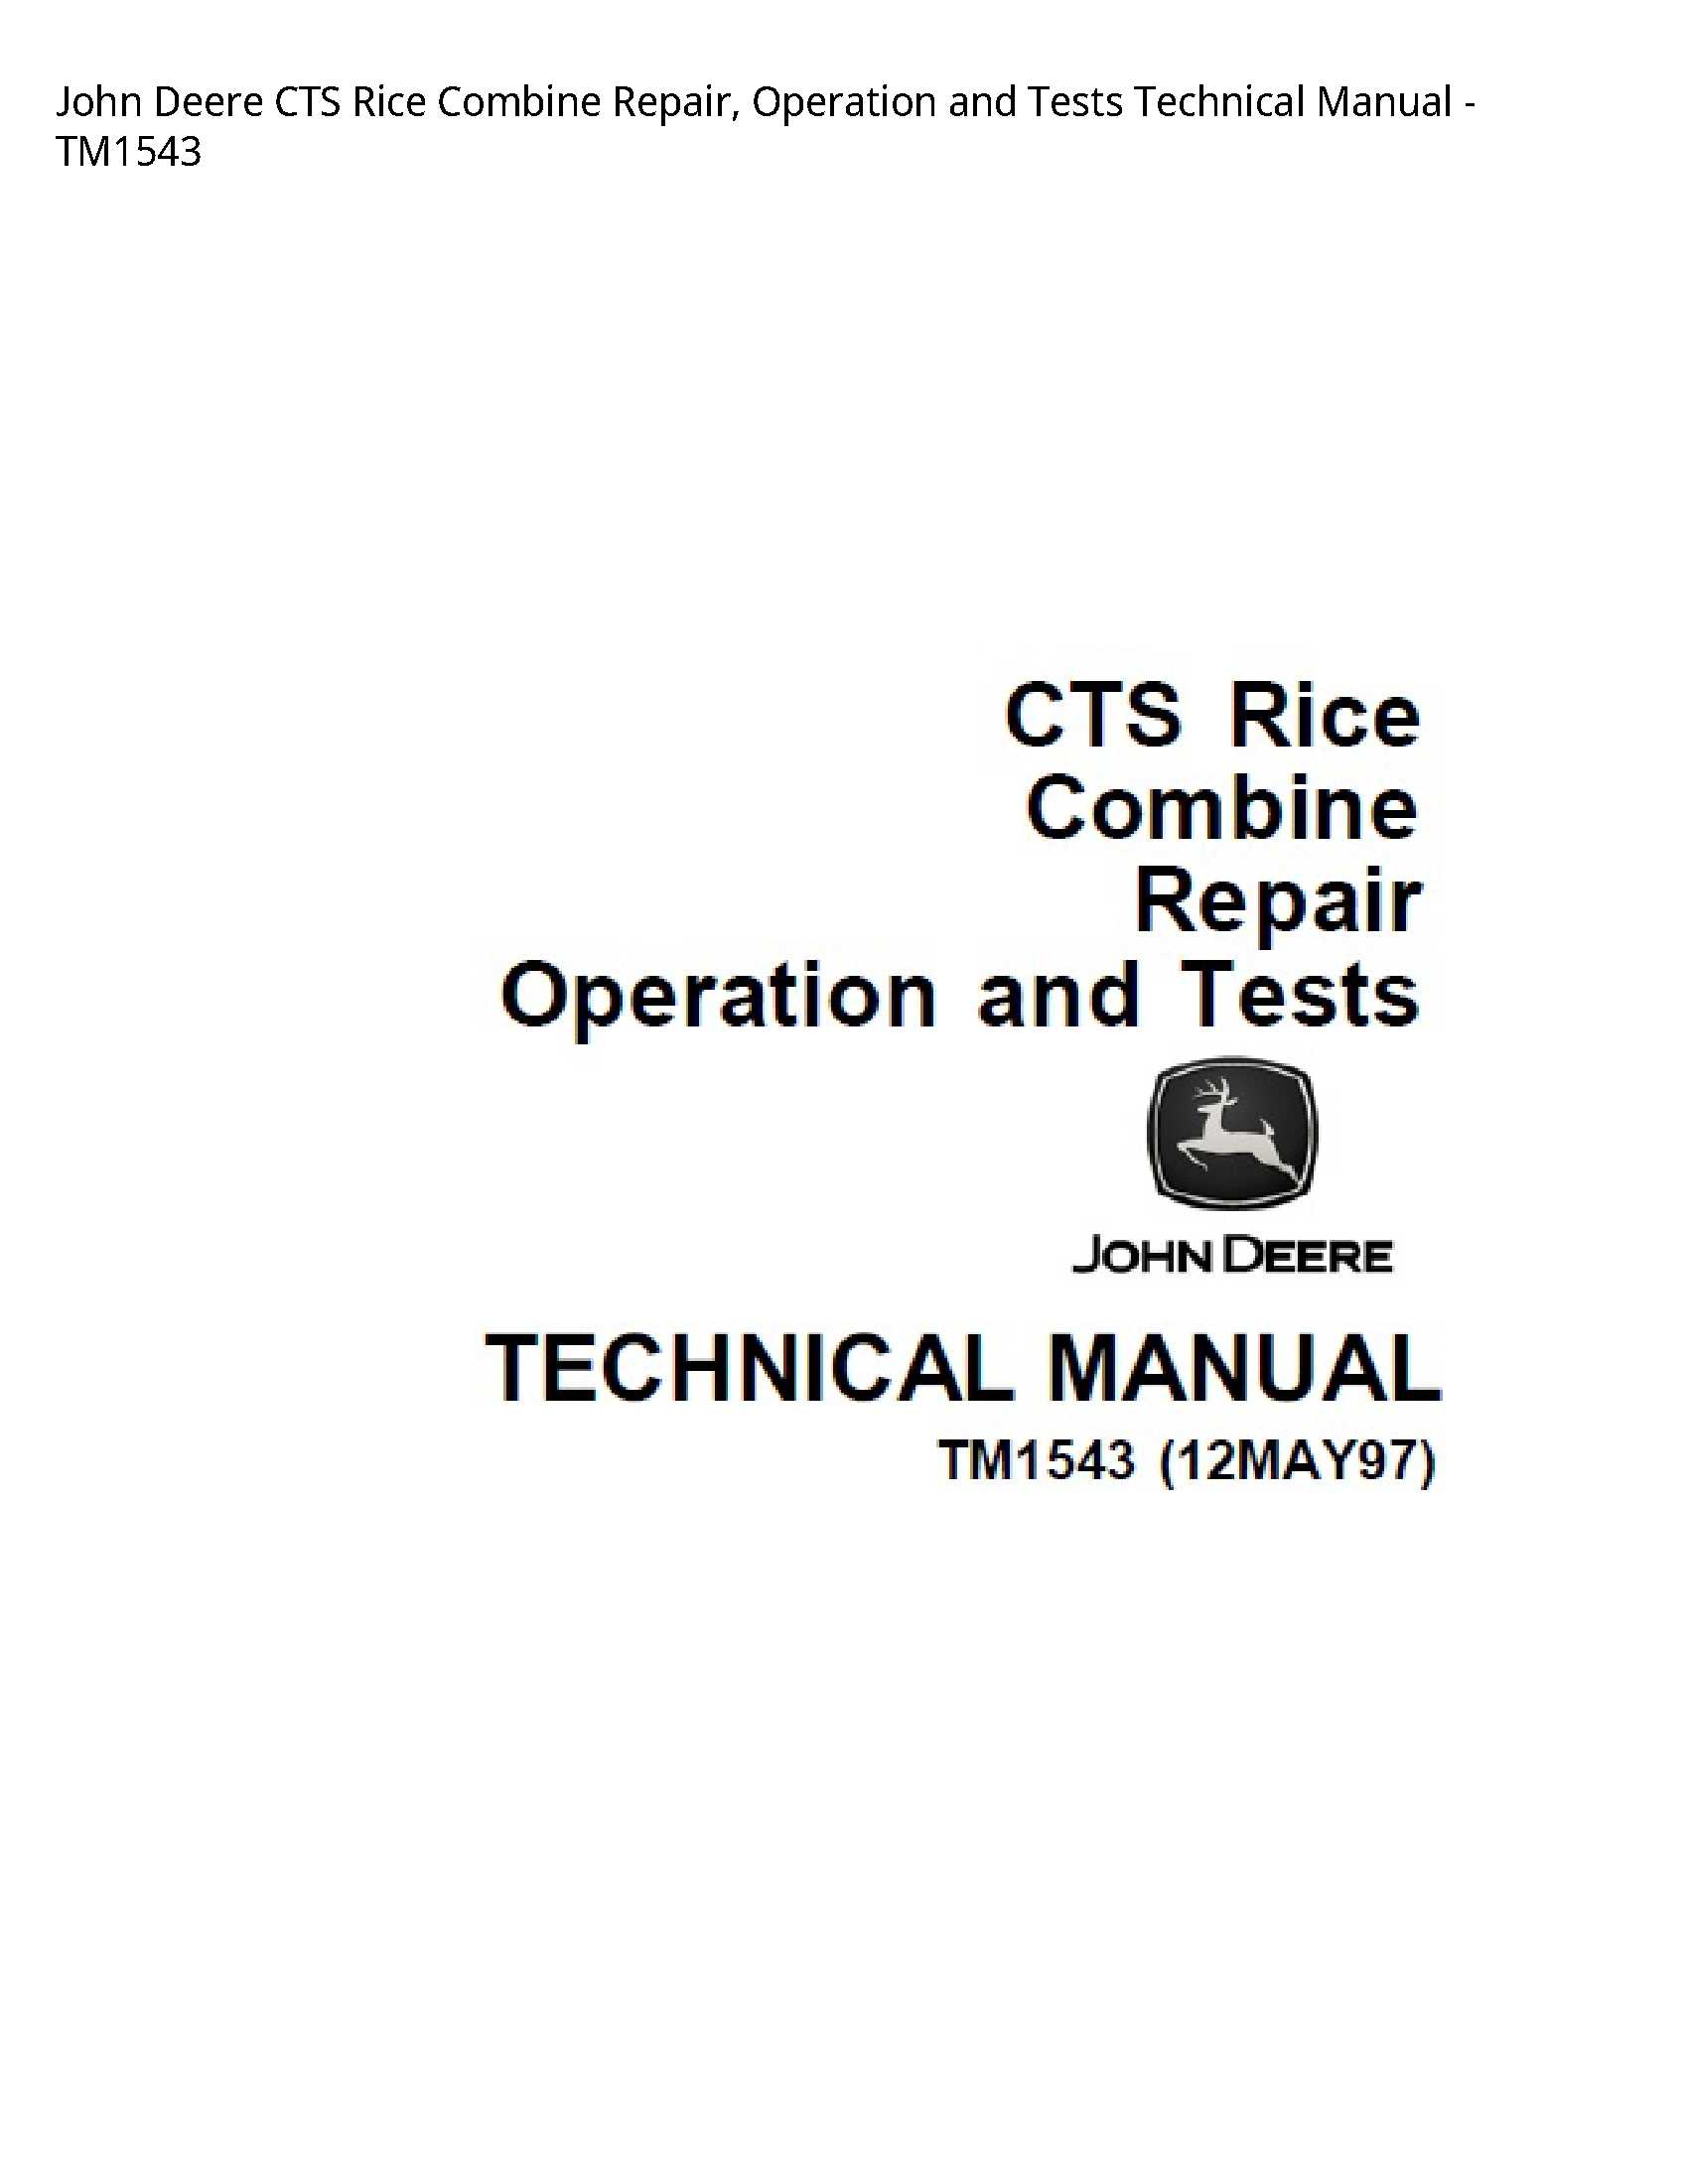 John Deere CTS Rice Combine Repair  Operation and Tests Technical Manual - TM1543